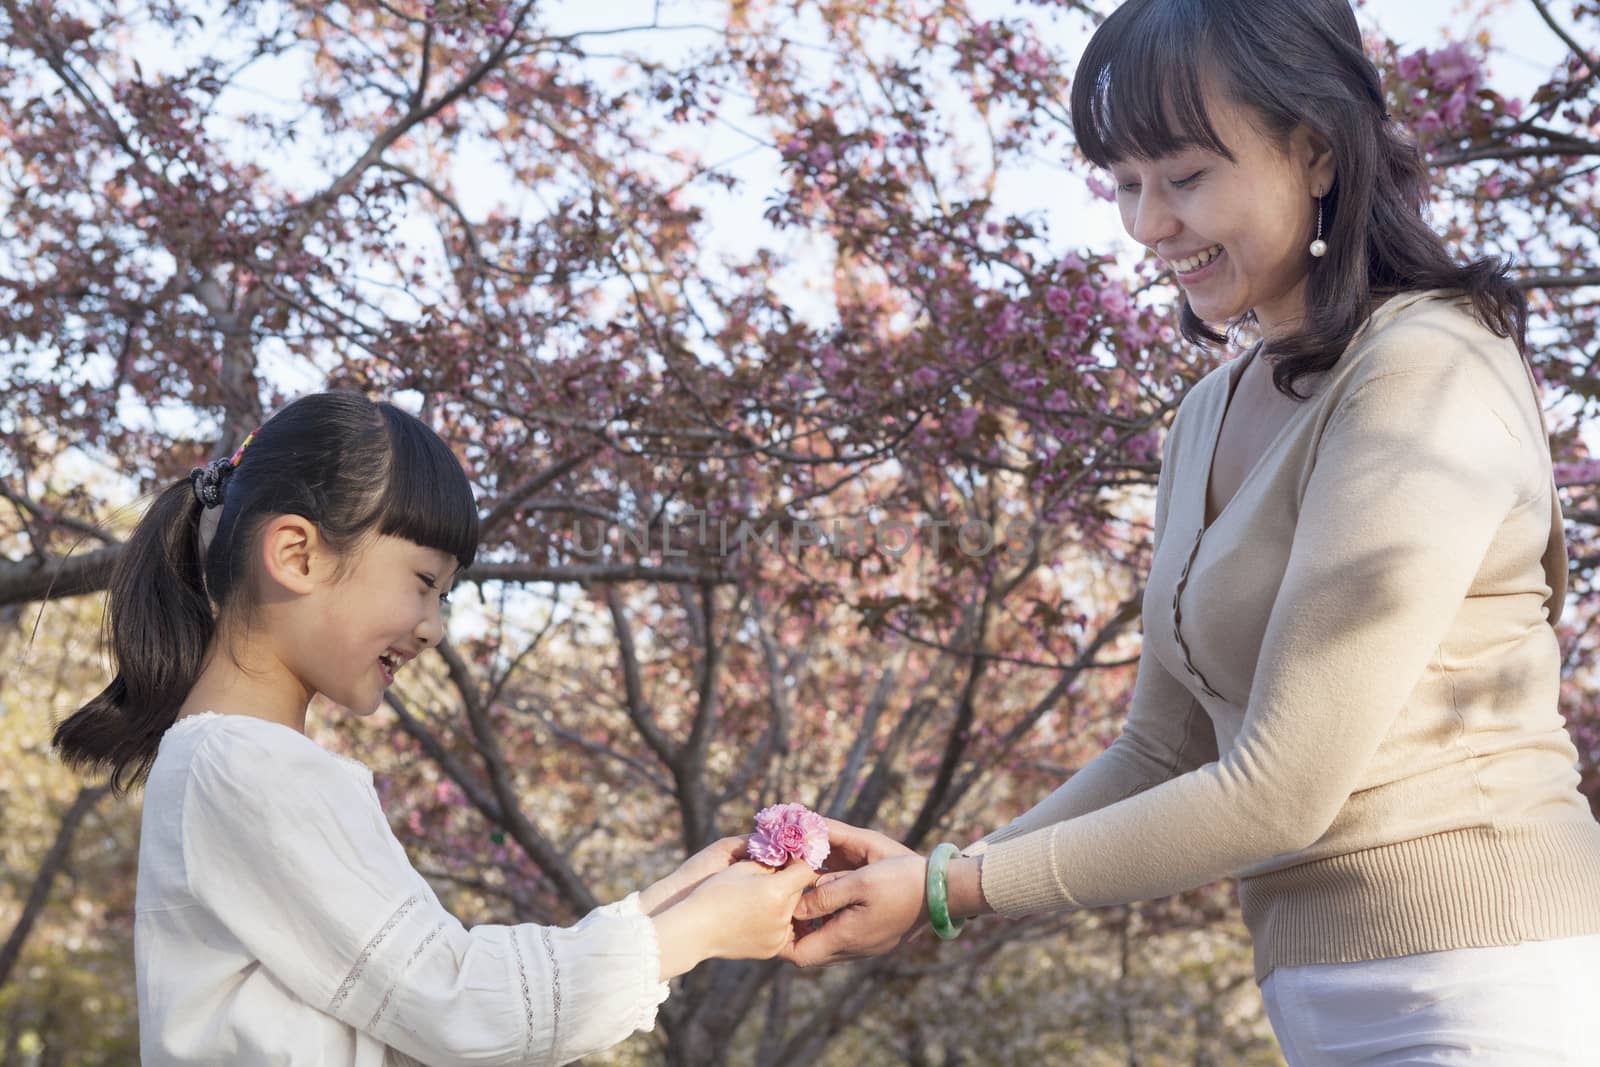 Smiling mother giving her daughter a cherry blossom outside in the park in the springtime, Beijing